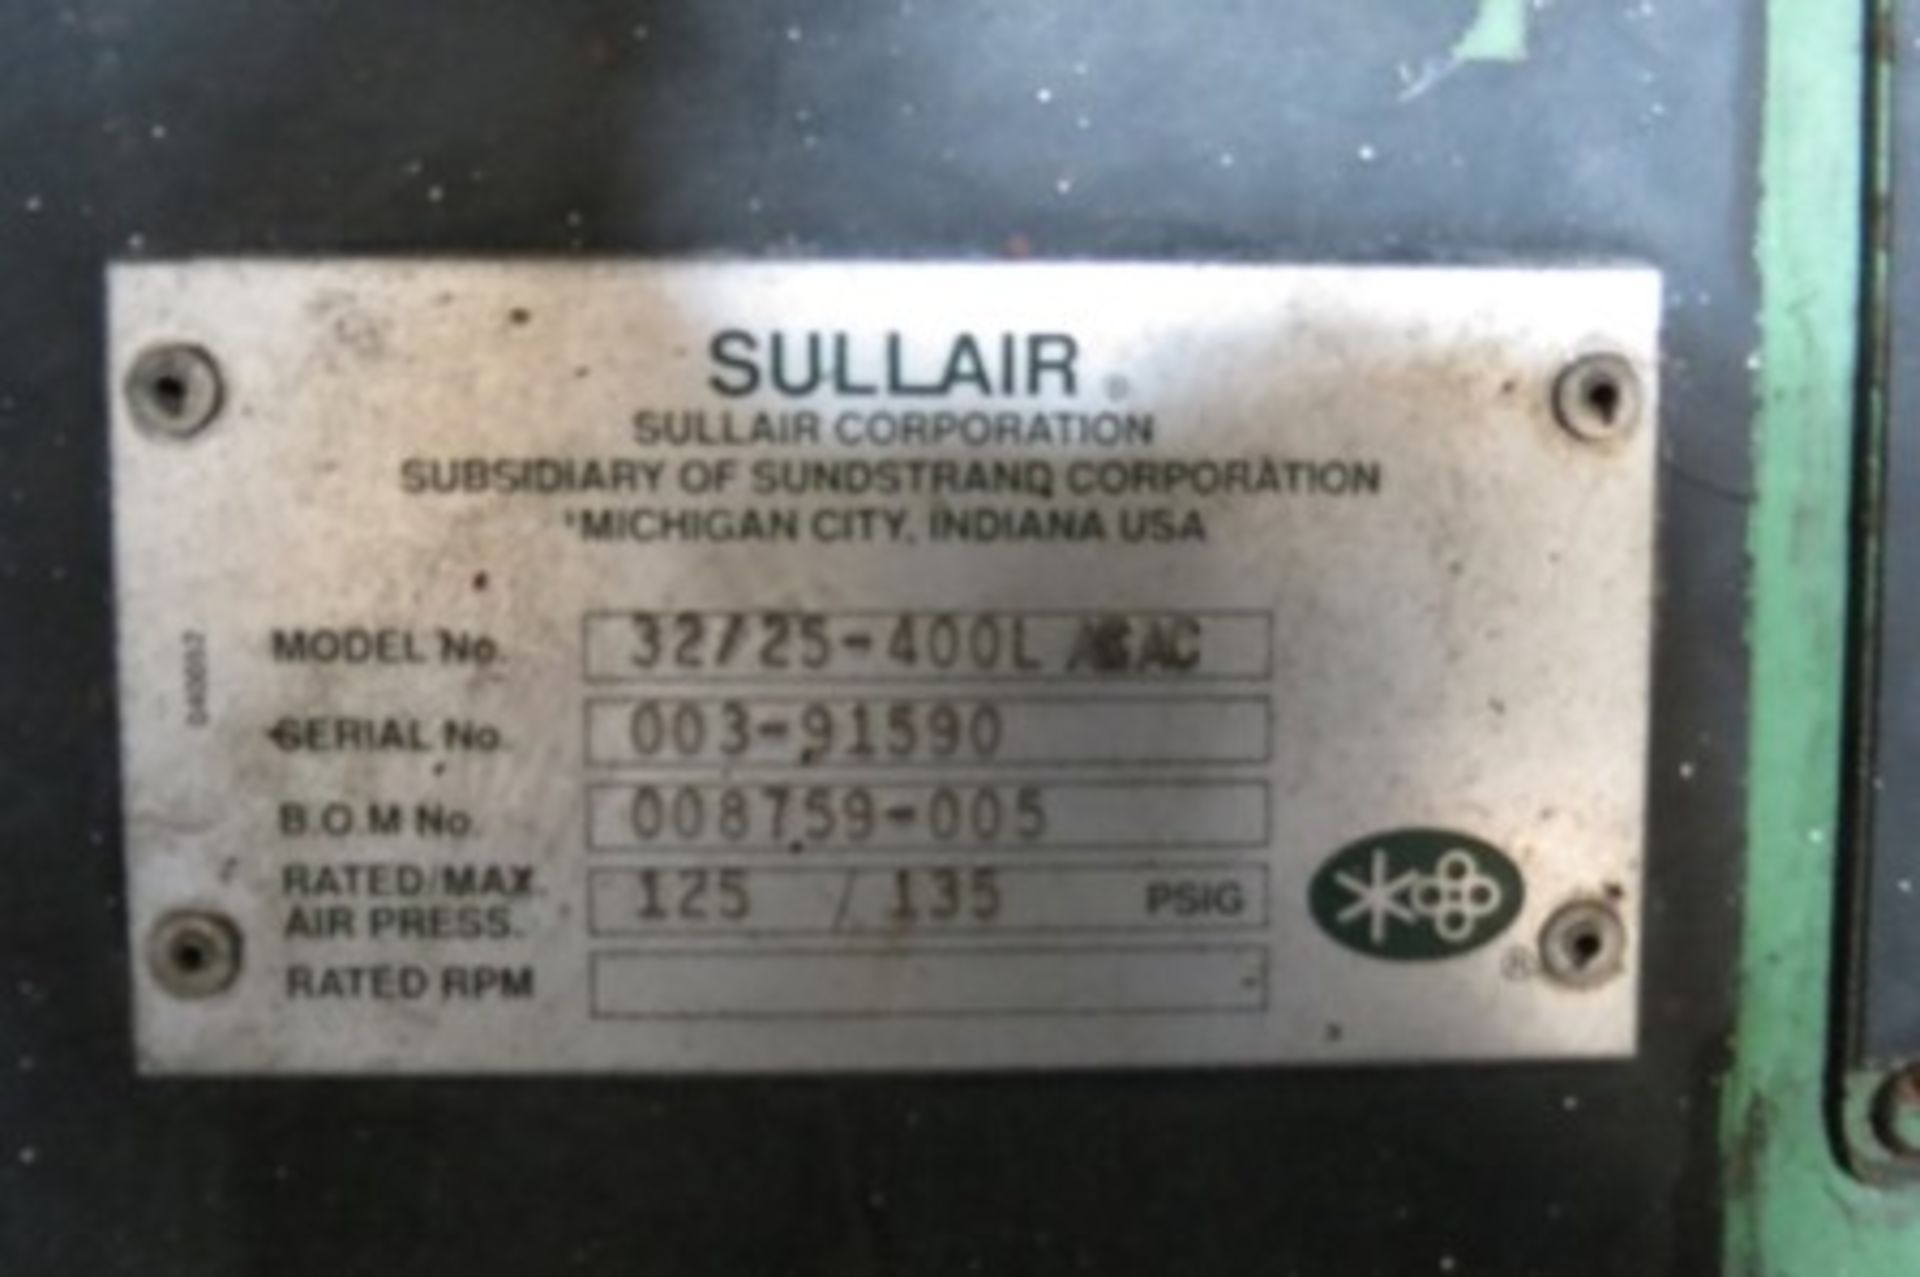 Air compressor Sullair 32 / 25-400L AC s/n 003-9159018/04/201, 1989, rotary screw, 450 hp - Image 18 of 19